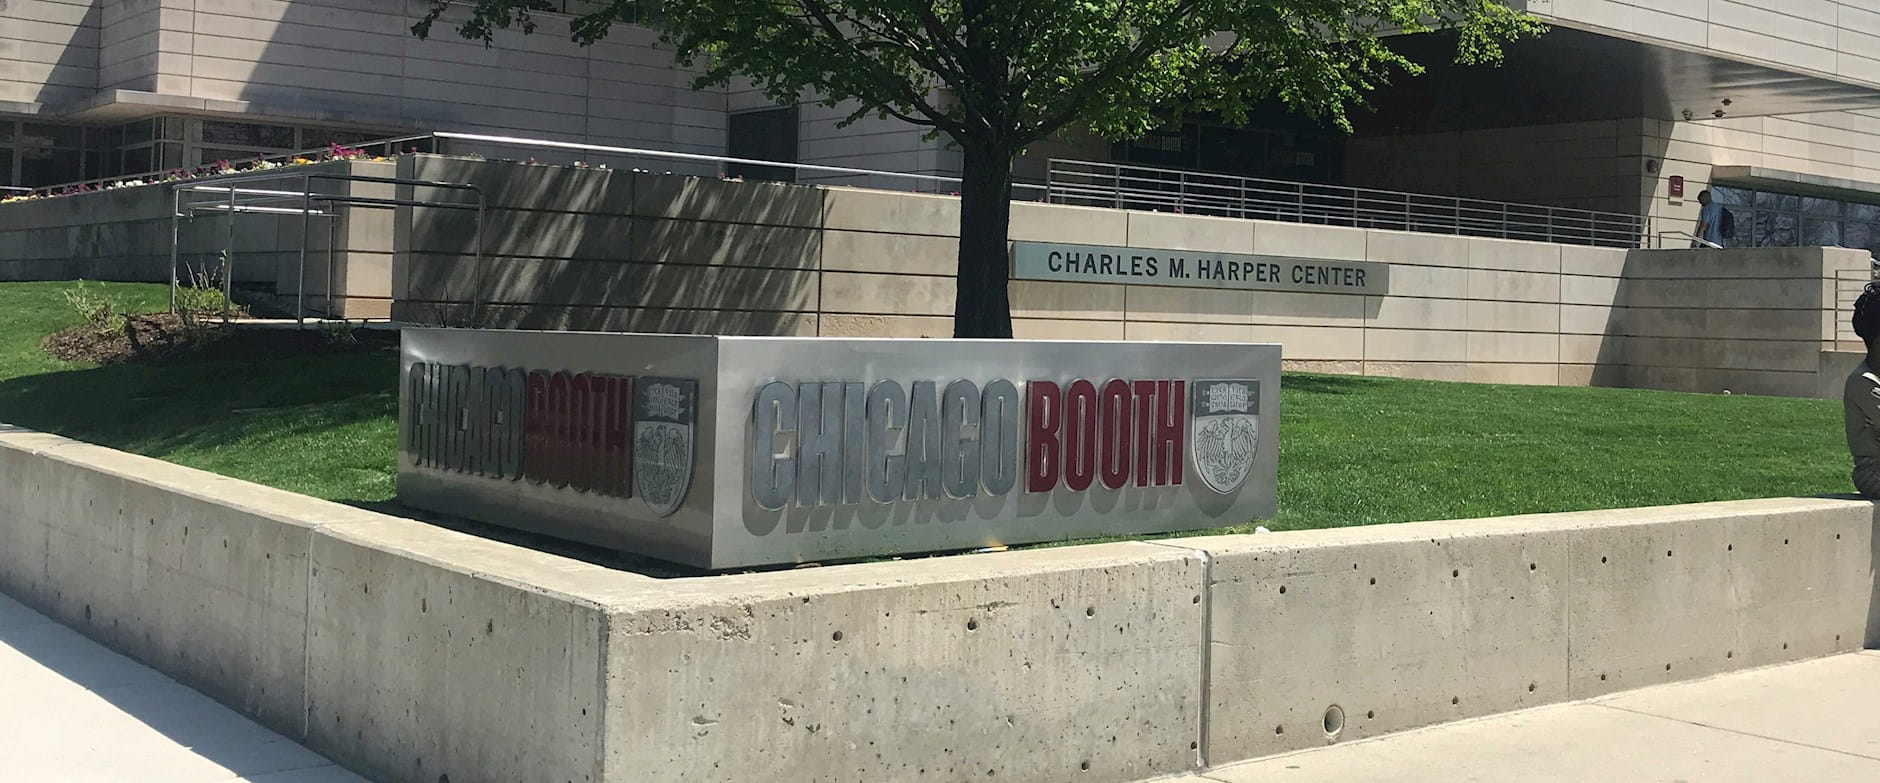 Navigating Chicago Booth Academics – THE BOOTH EXPERIENCE